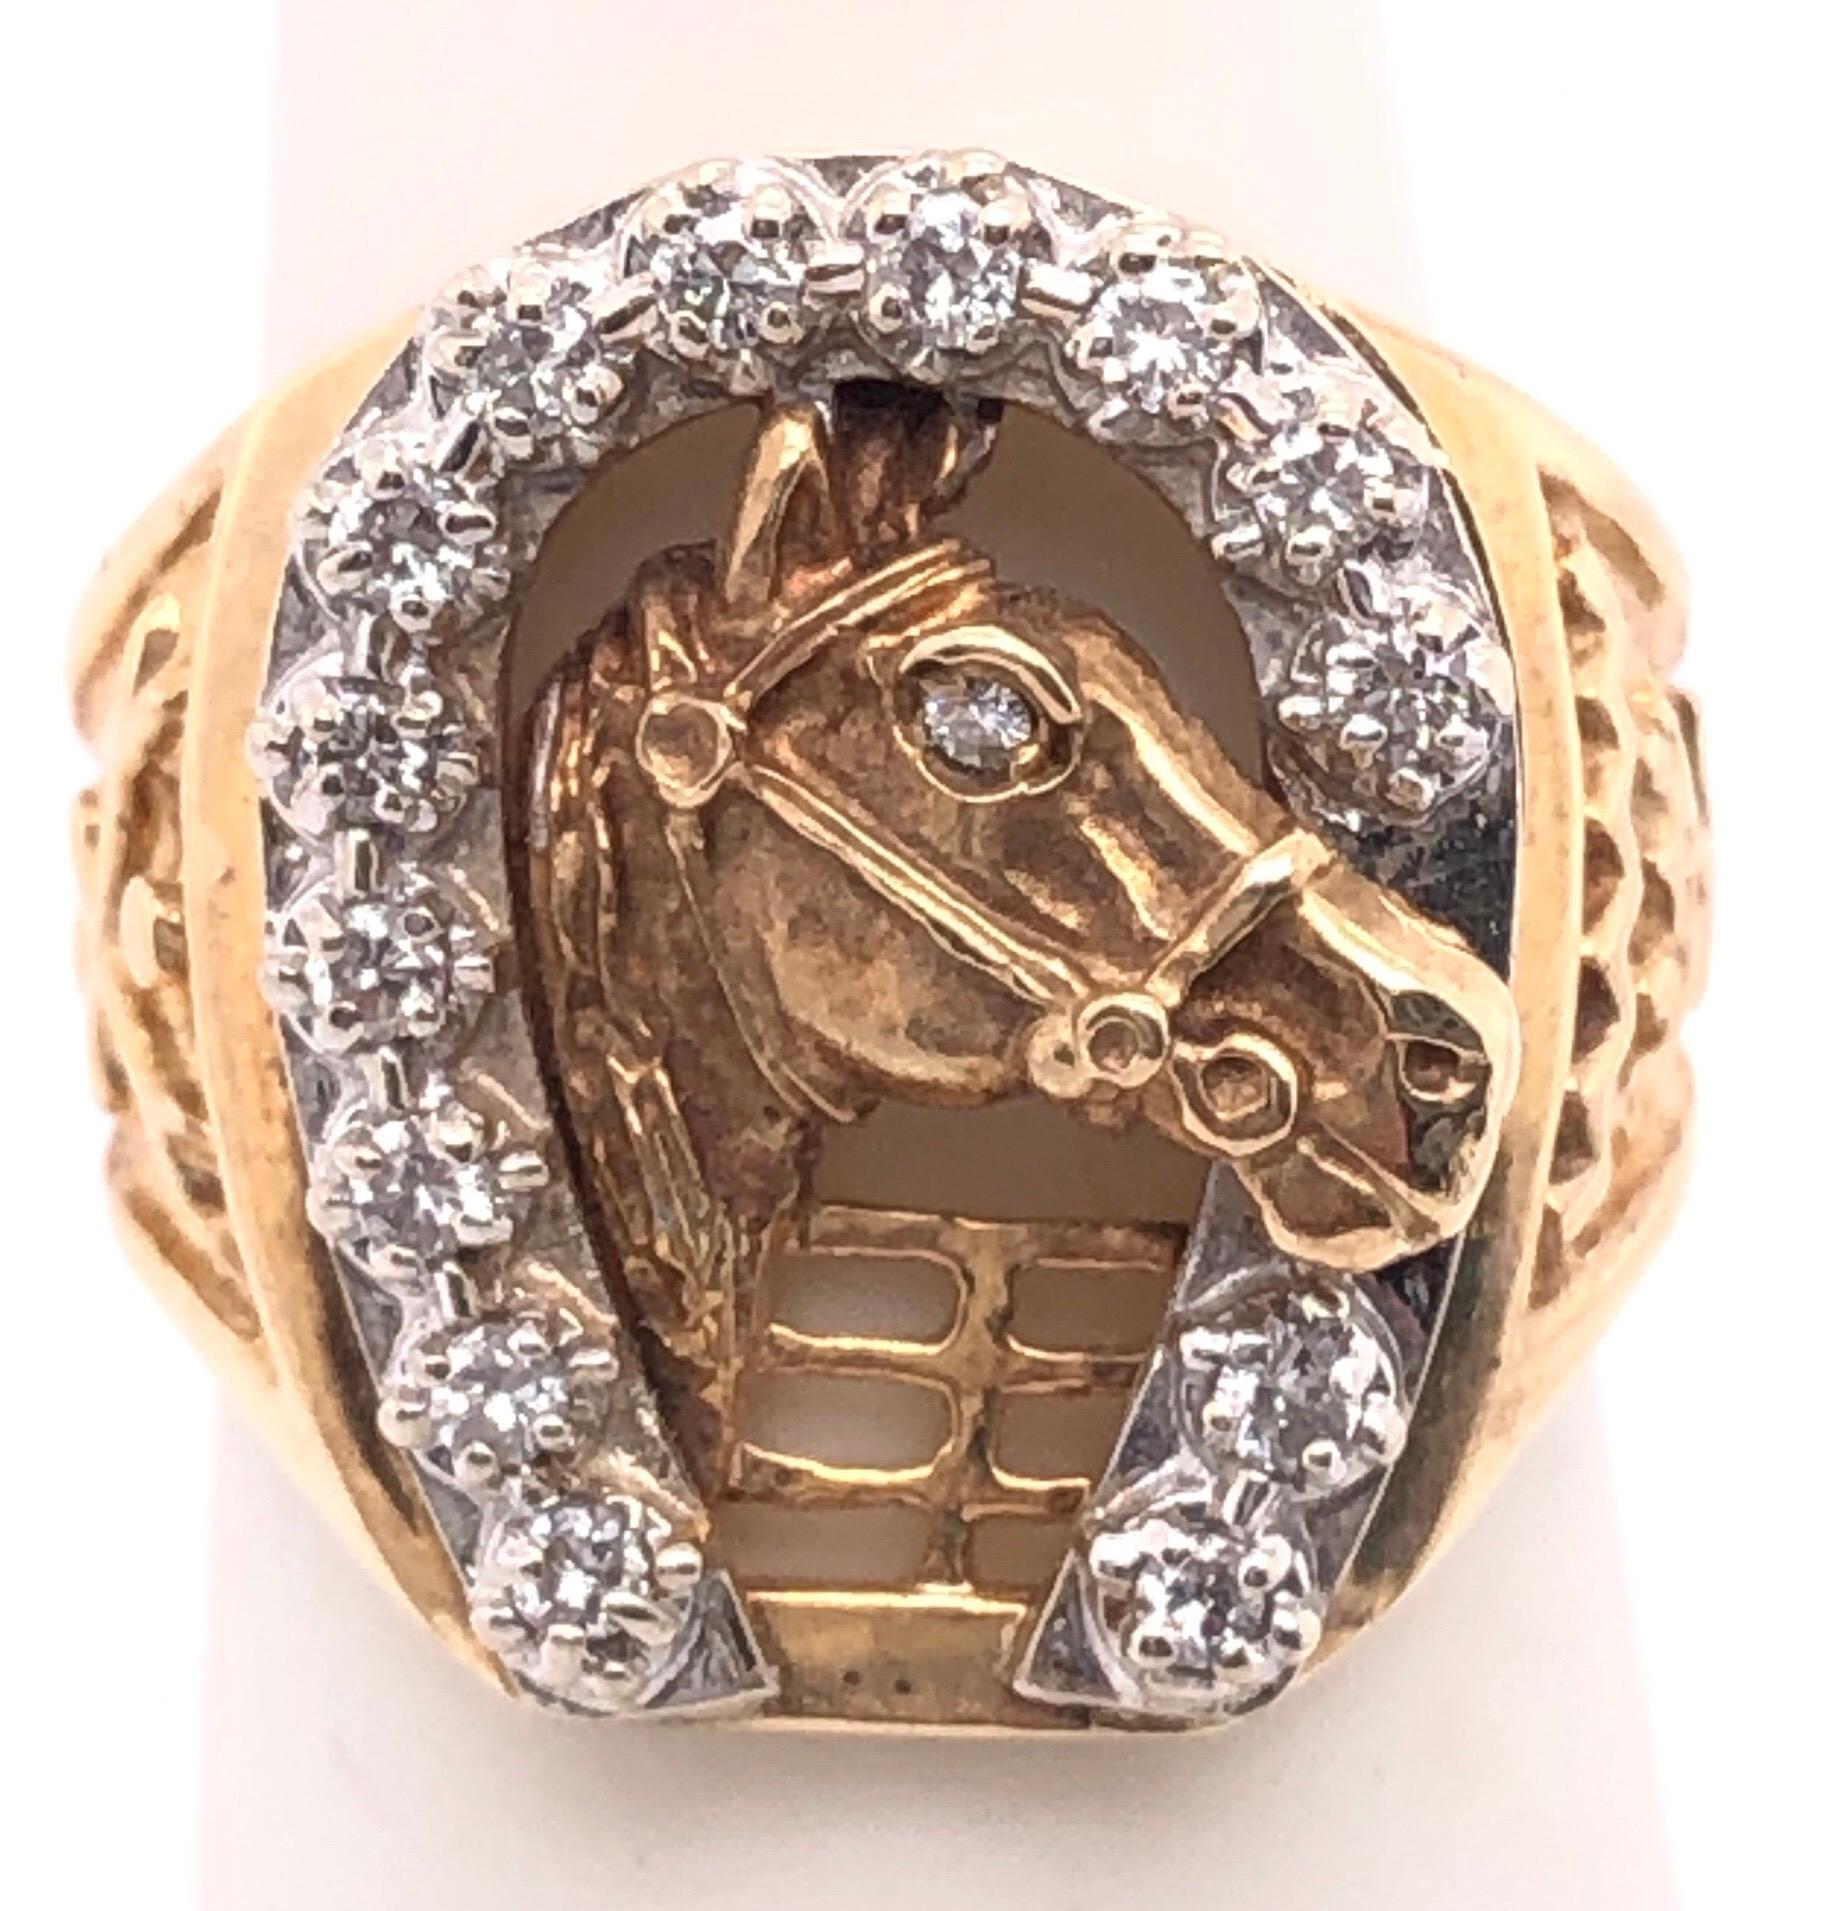 14 Karat Two Tone Gold Good Luck/Fashion Ring with Diamonds 0.25 TDW.
Size 5
8 grams total weight.